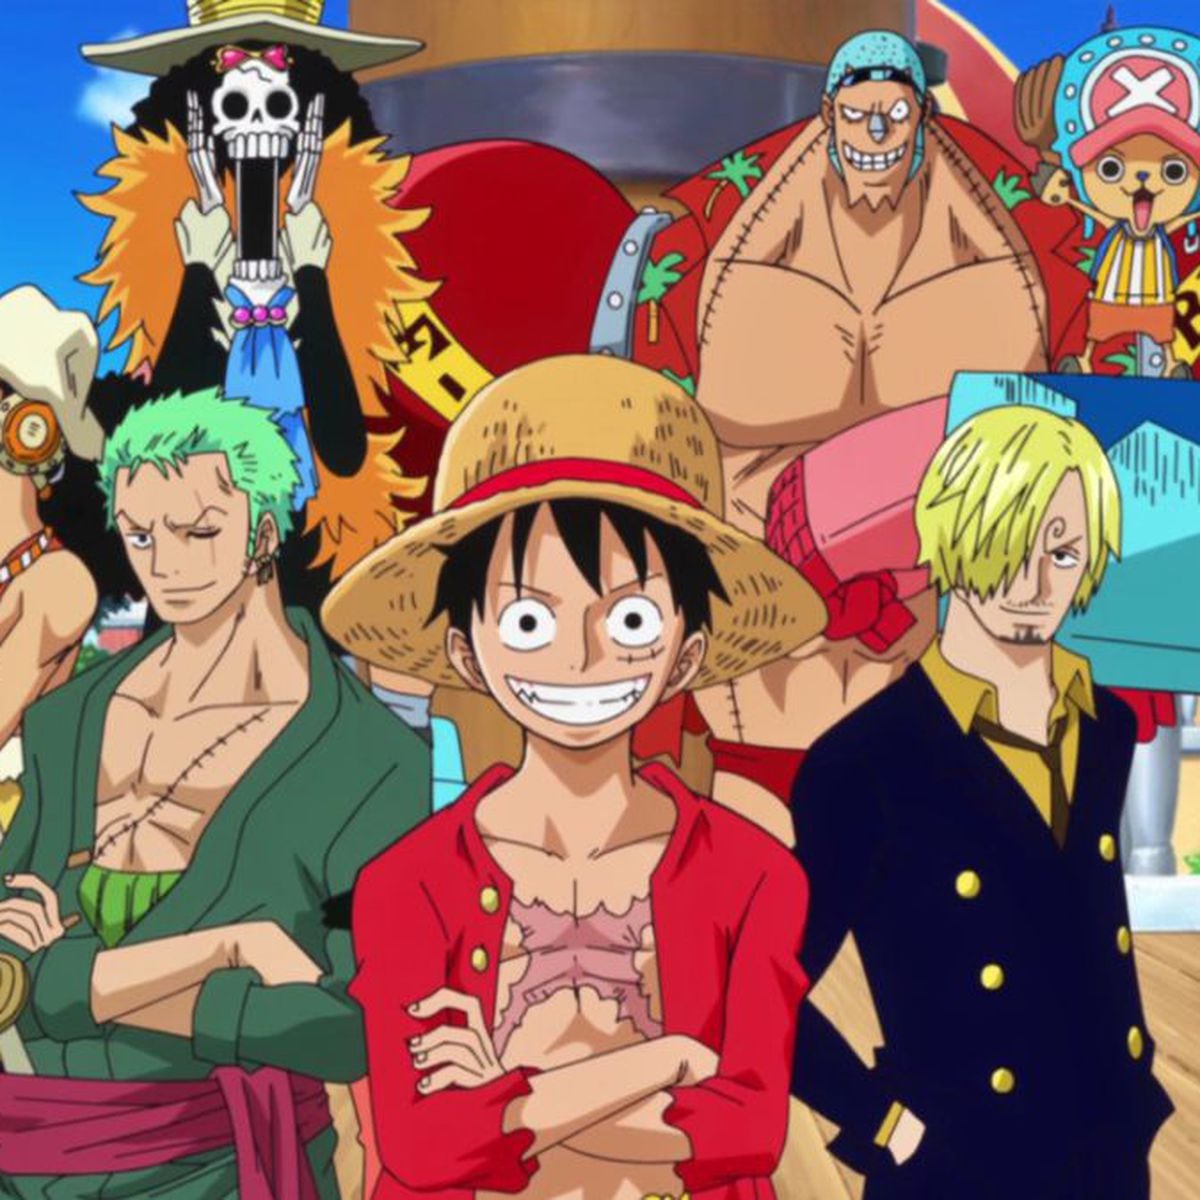 Is there a faster way to read/watch One Piece if you just started? - Quora